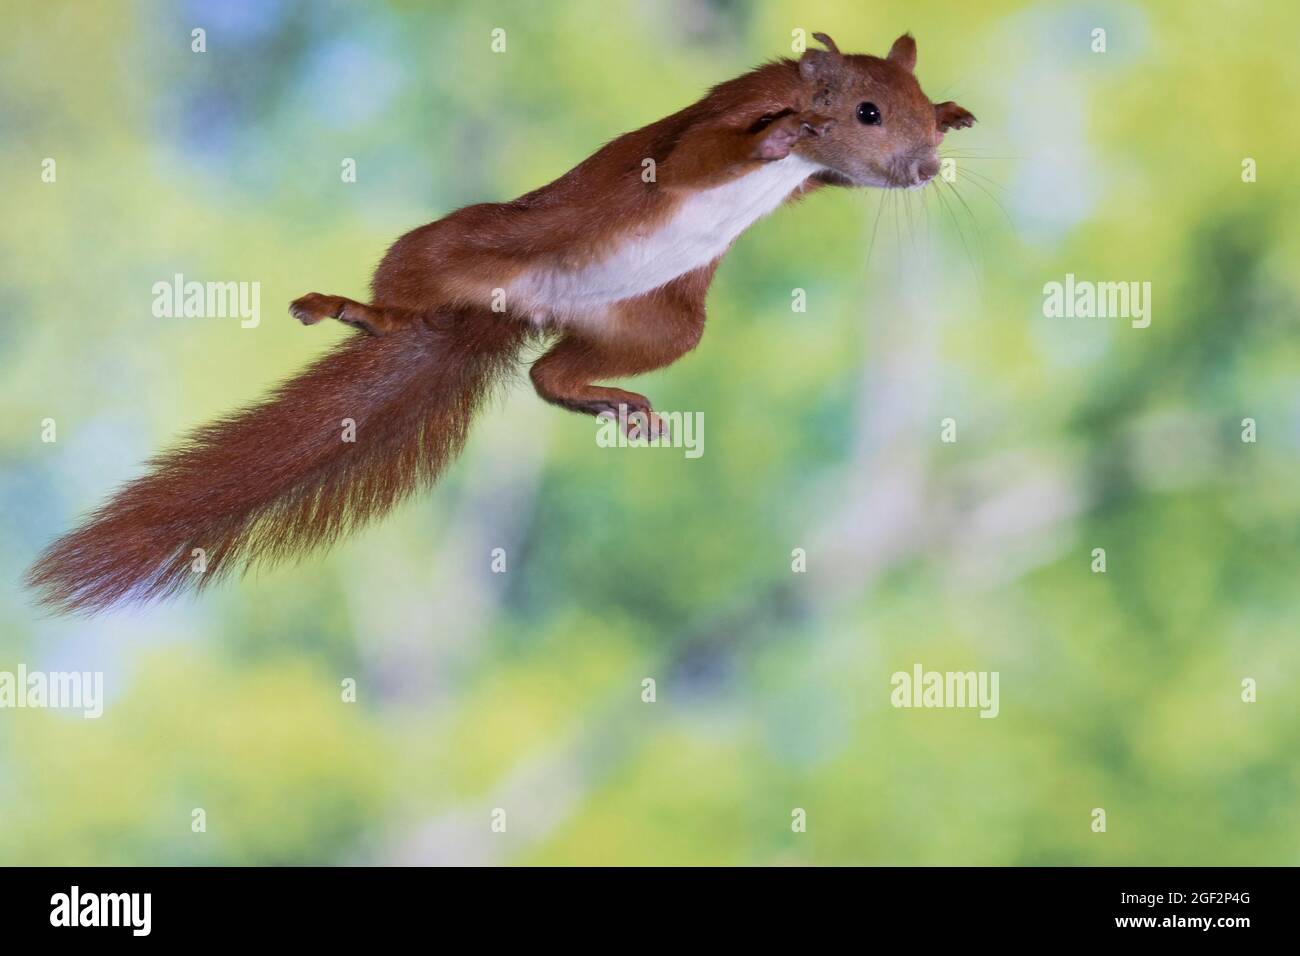 European red squirrel, Eurasian red squirrel (Sciurus vulgaris), in the jump, side view, Germany Stock Photo